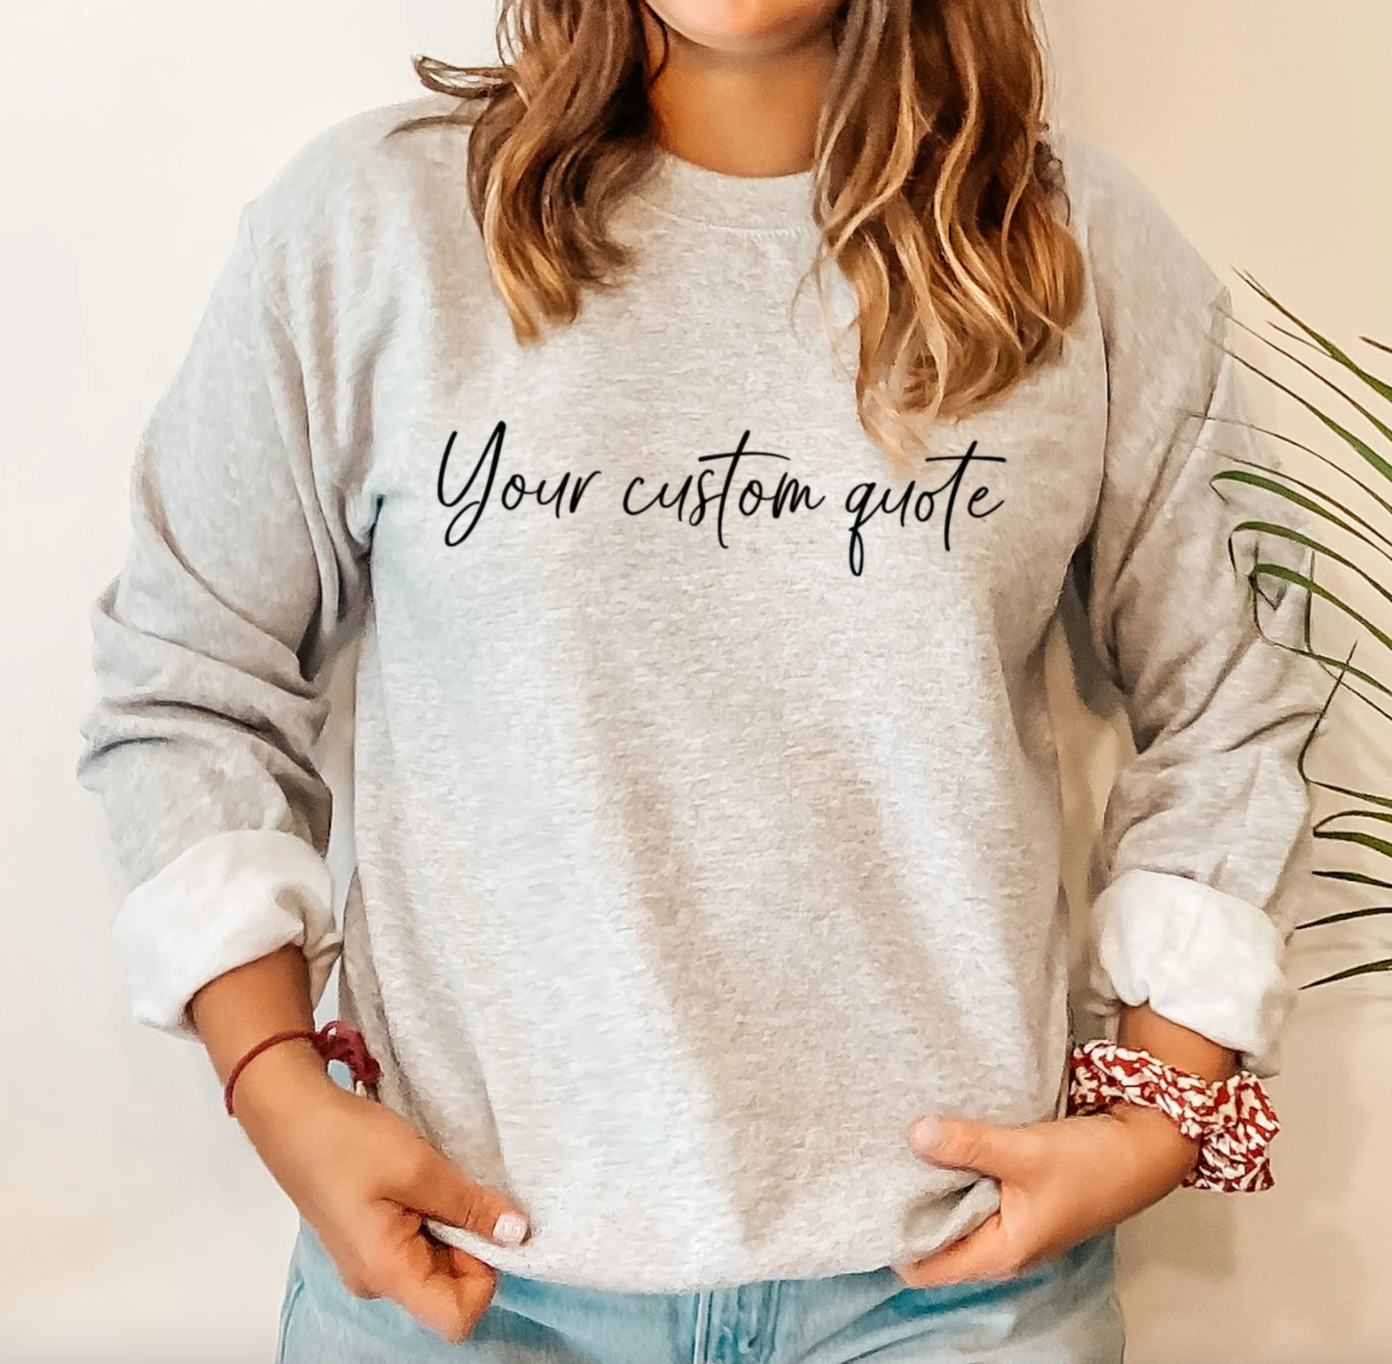 model wearing gray sweatshirt that can be personalized with custom text